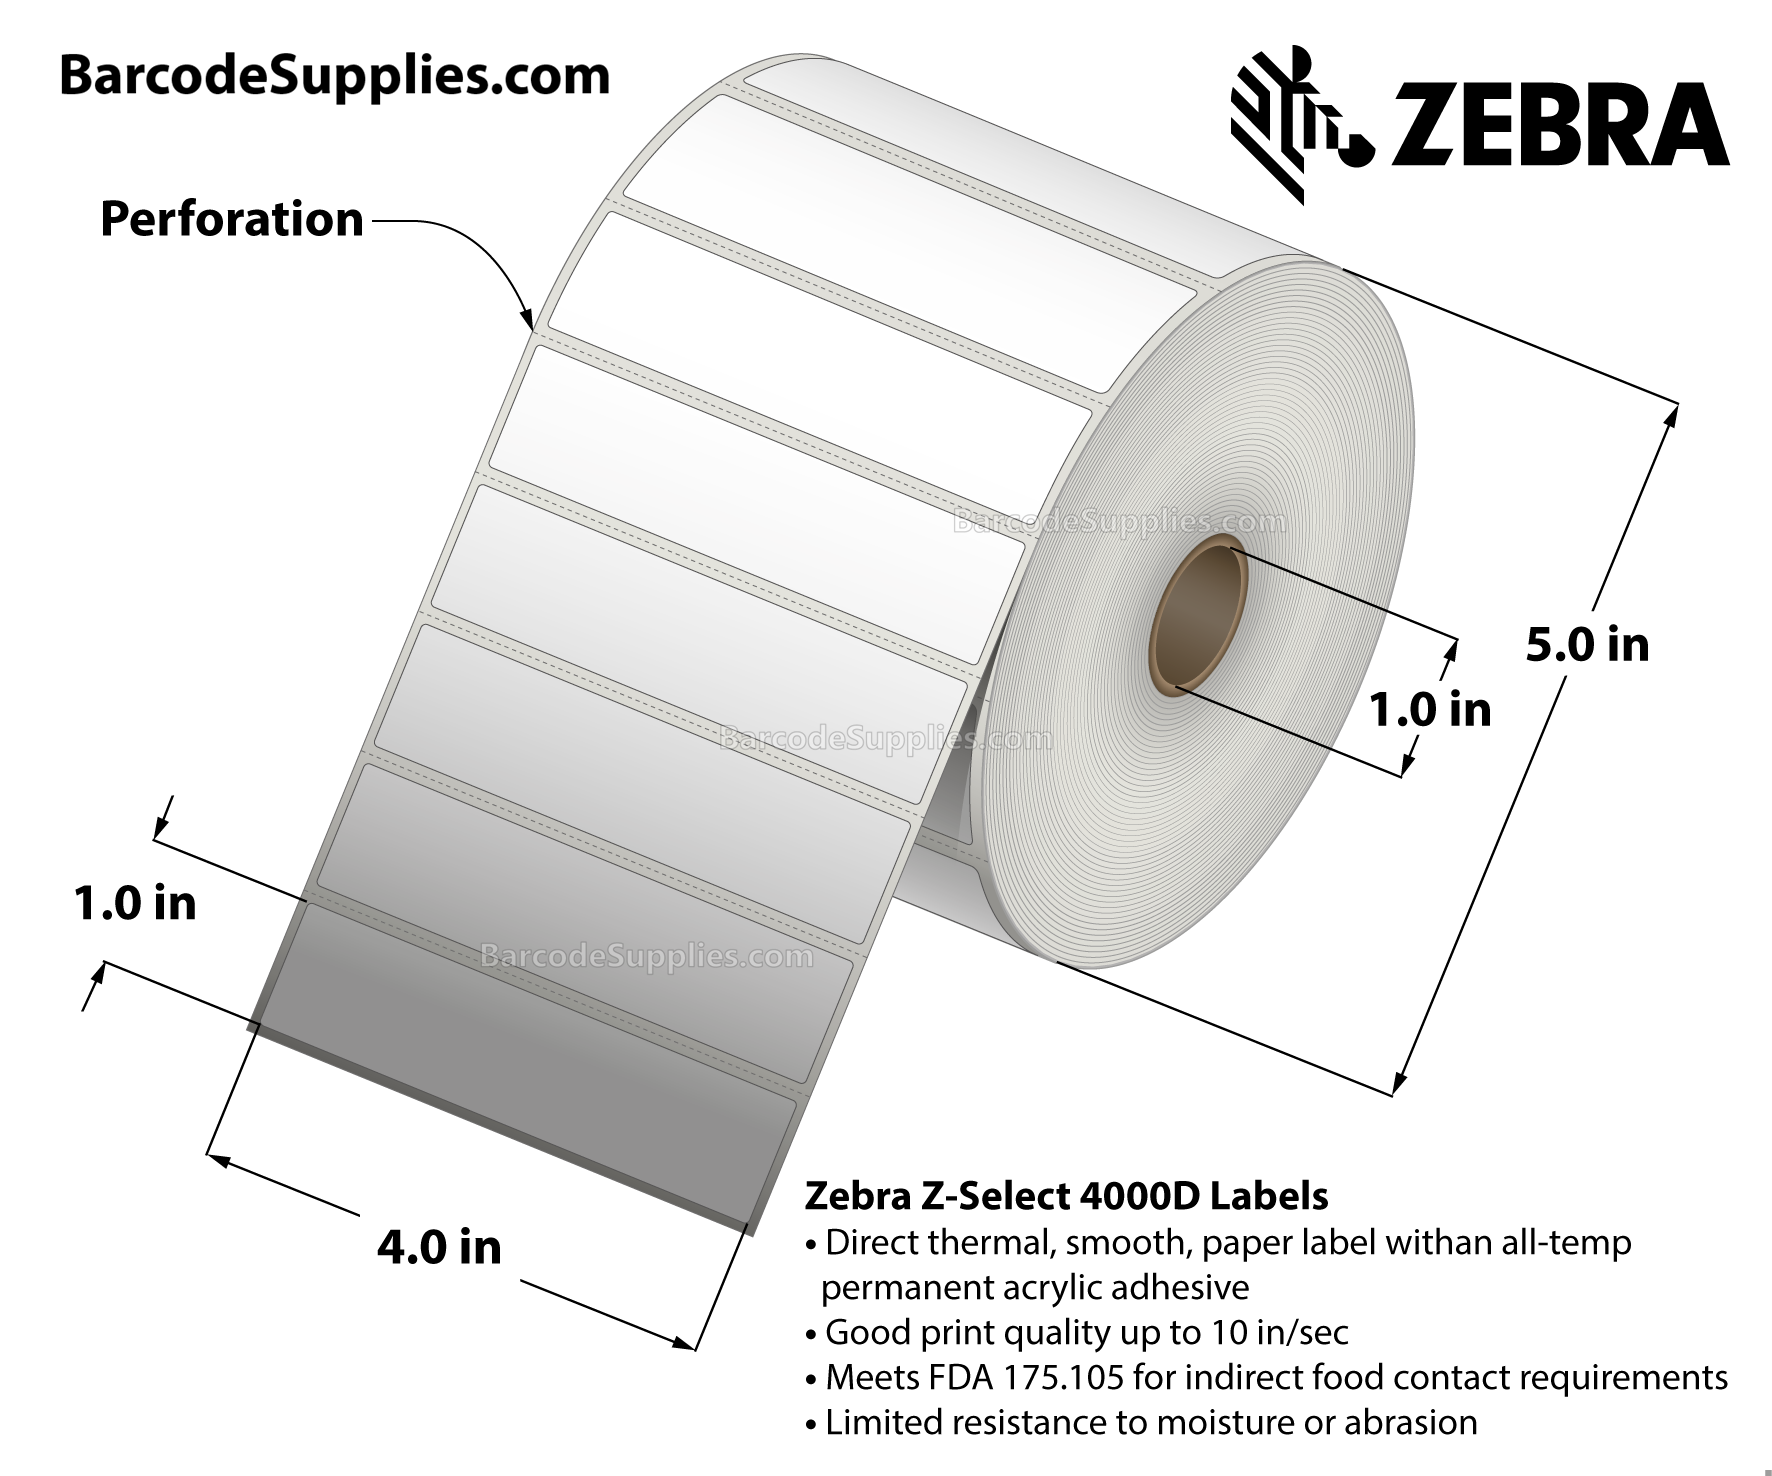 4 x 1 Direct Thermal White Z-Select 4000D Labels With All-Temp Adhesive - Perforated - 2340 Labels Per Roll - Carton Of 6 Rolls - 14040 Labels Total - MPN: 10010045